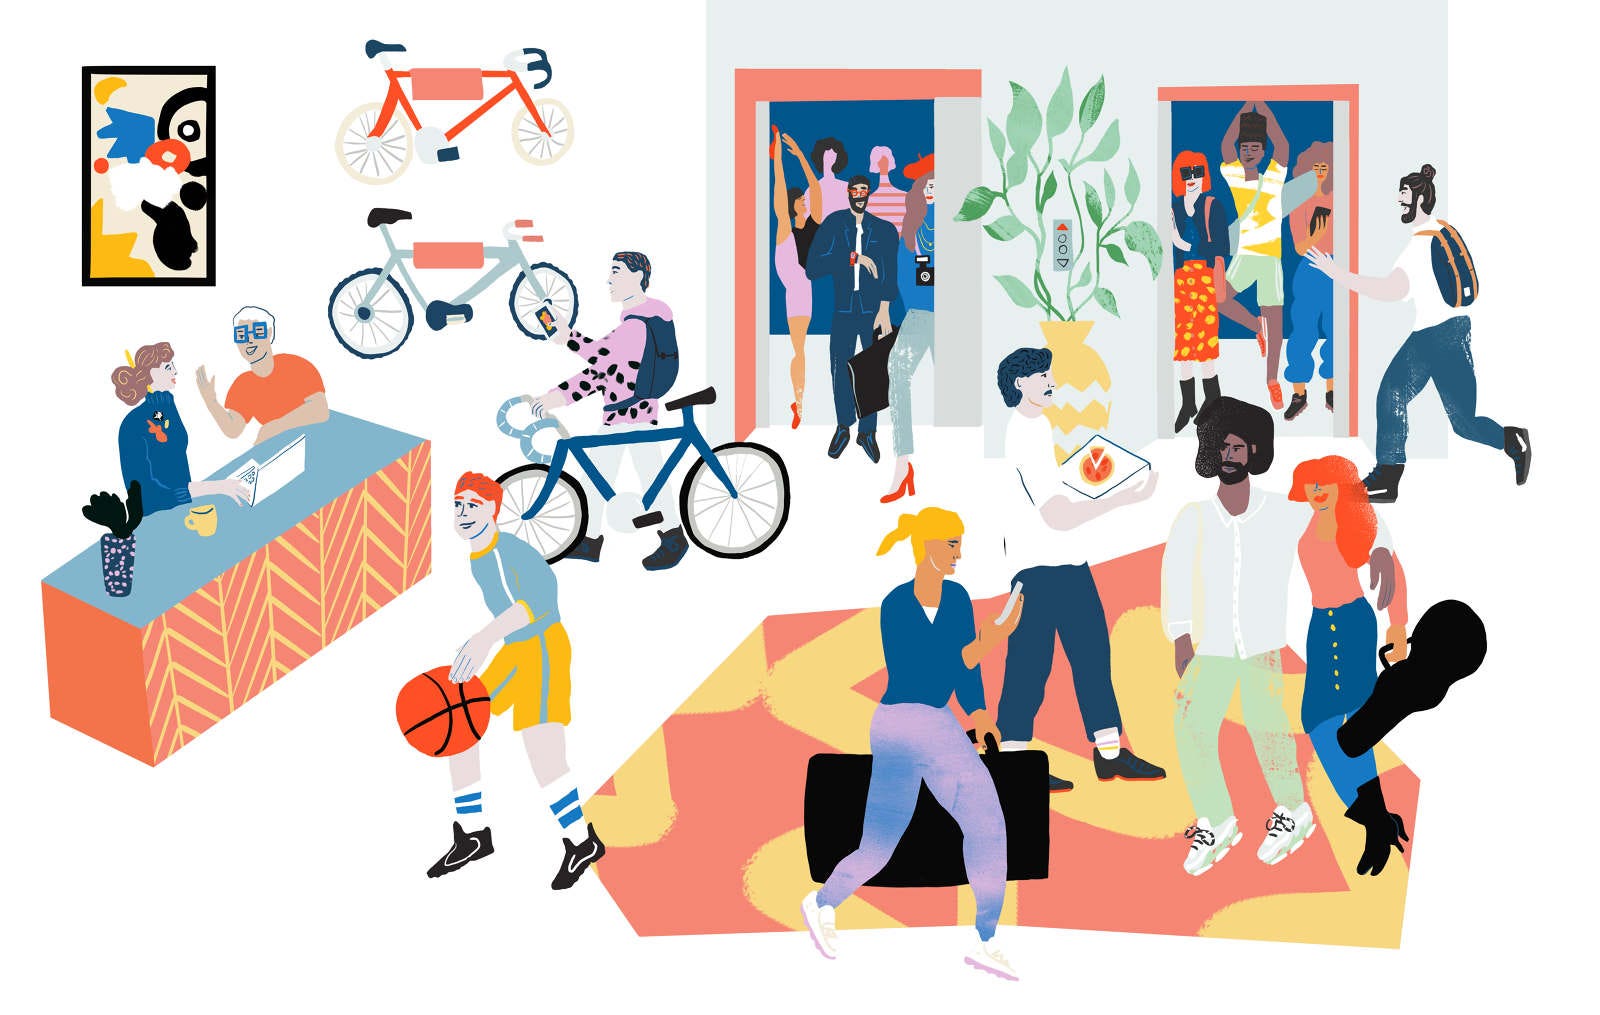 A busy illustration containing many people doing various activities like biking, dancing, playing basketball, holding a guitar case.